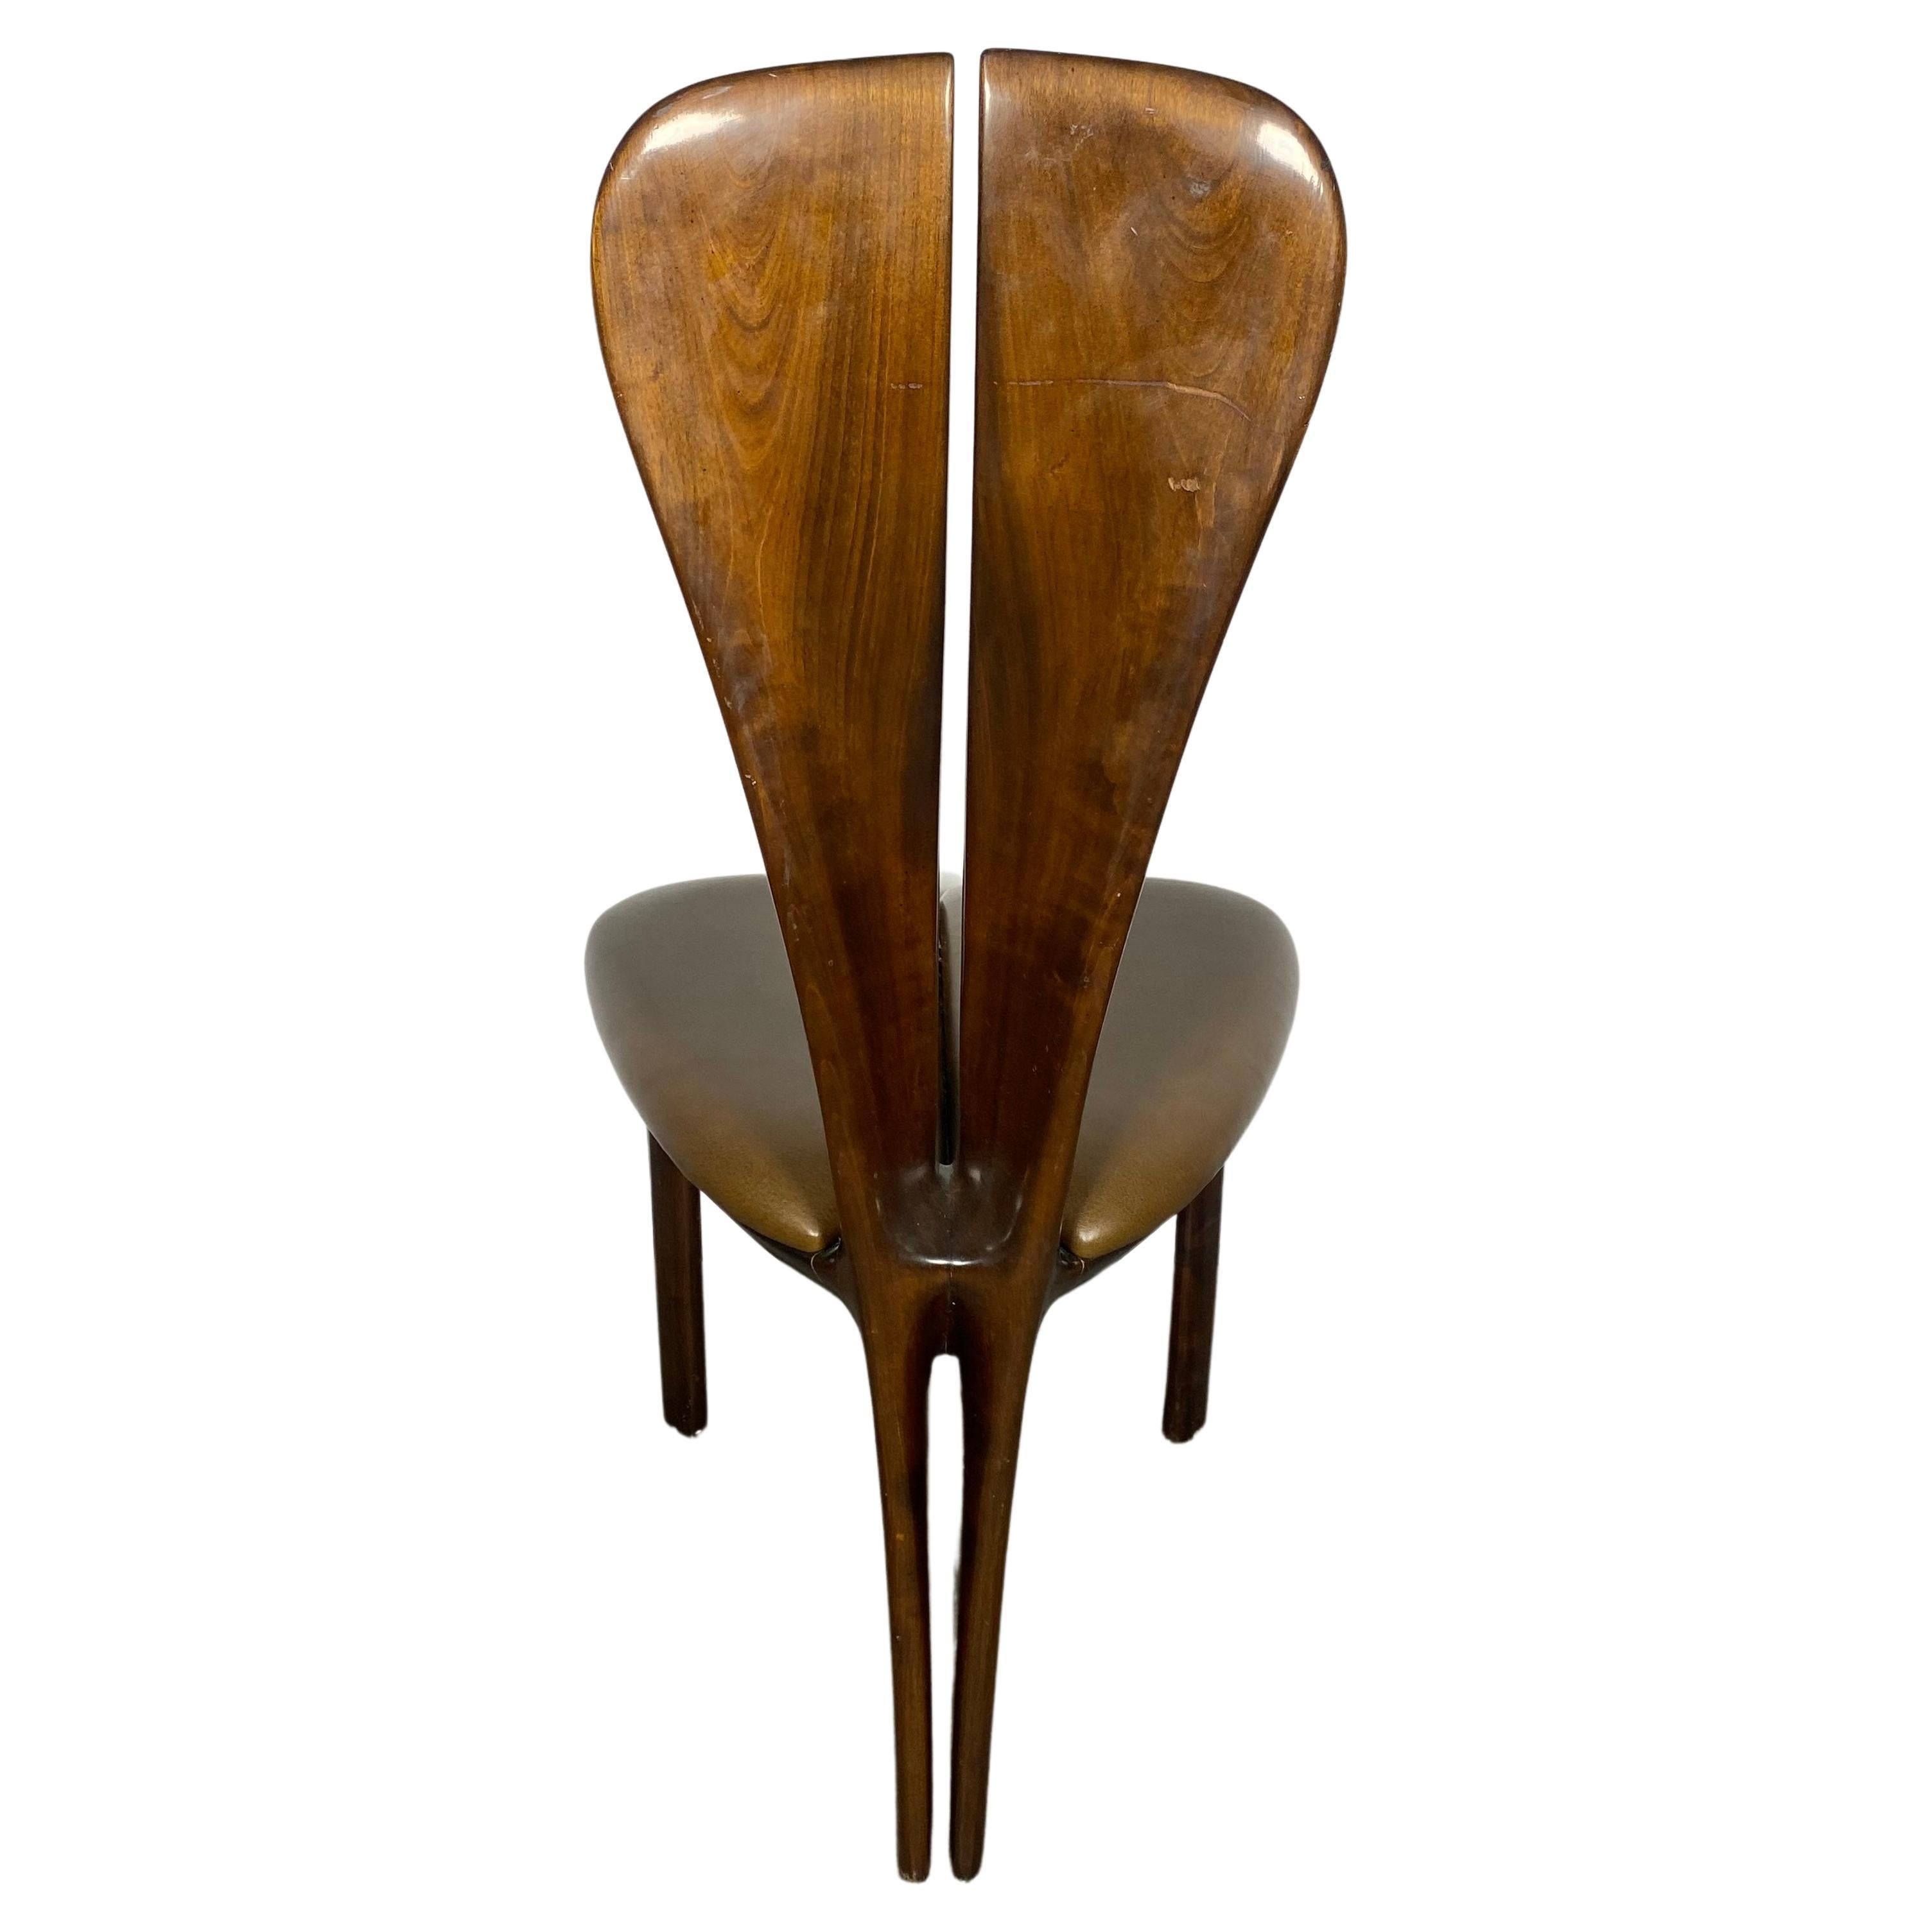 Unusual post modernist sculpted wood side/ desk chair by Edward Axel Roffman